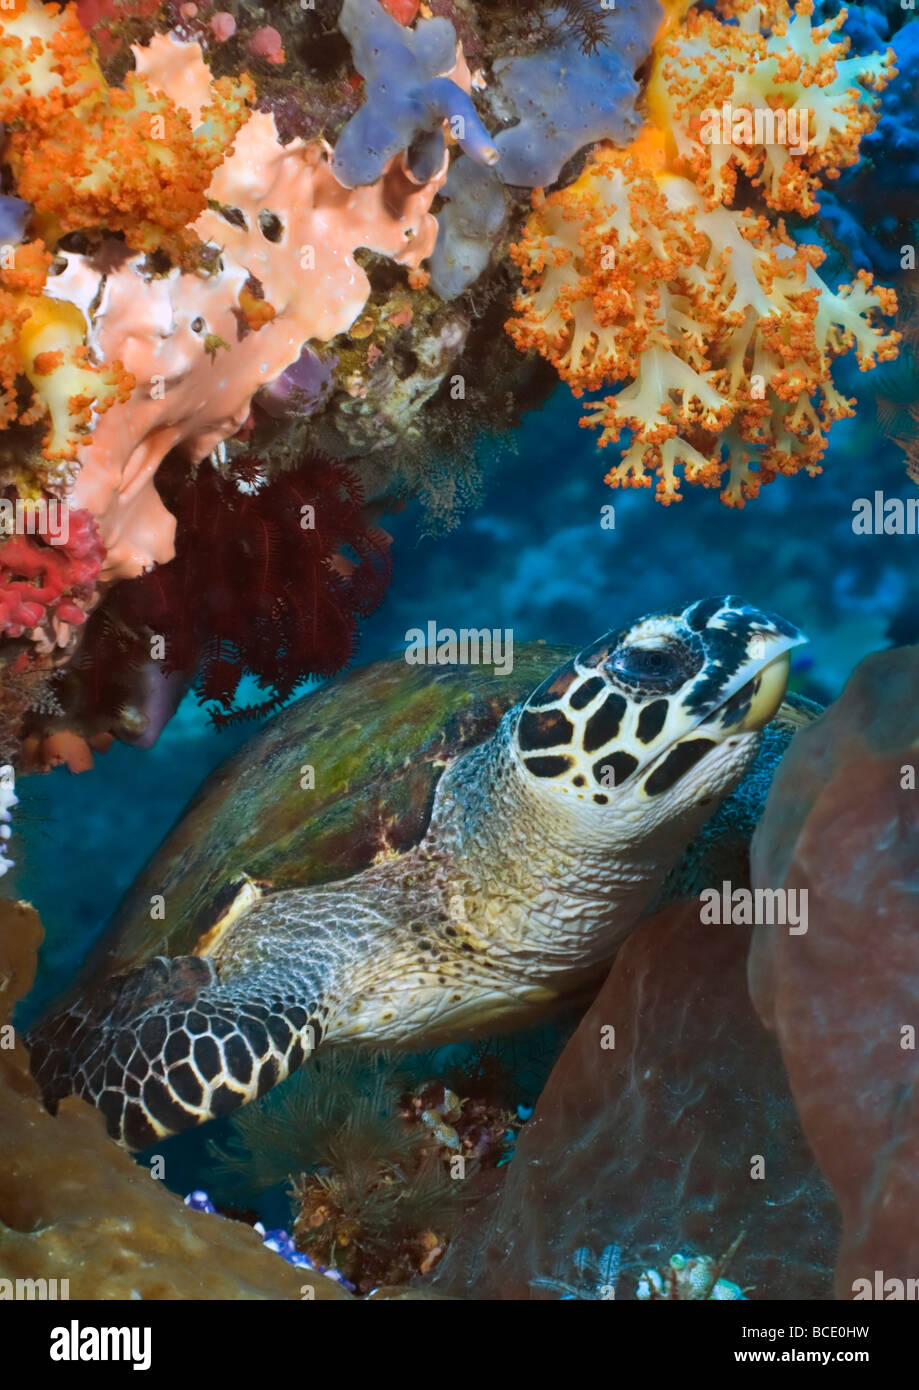 A Green Sea Turtle rests amongst the coral at a reef near Komodo Island in The Flores Sea, Indonesia. Stock Photo